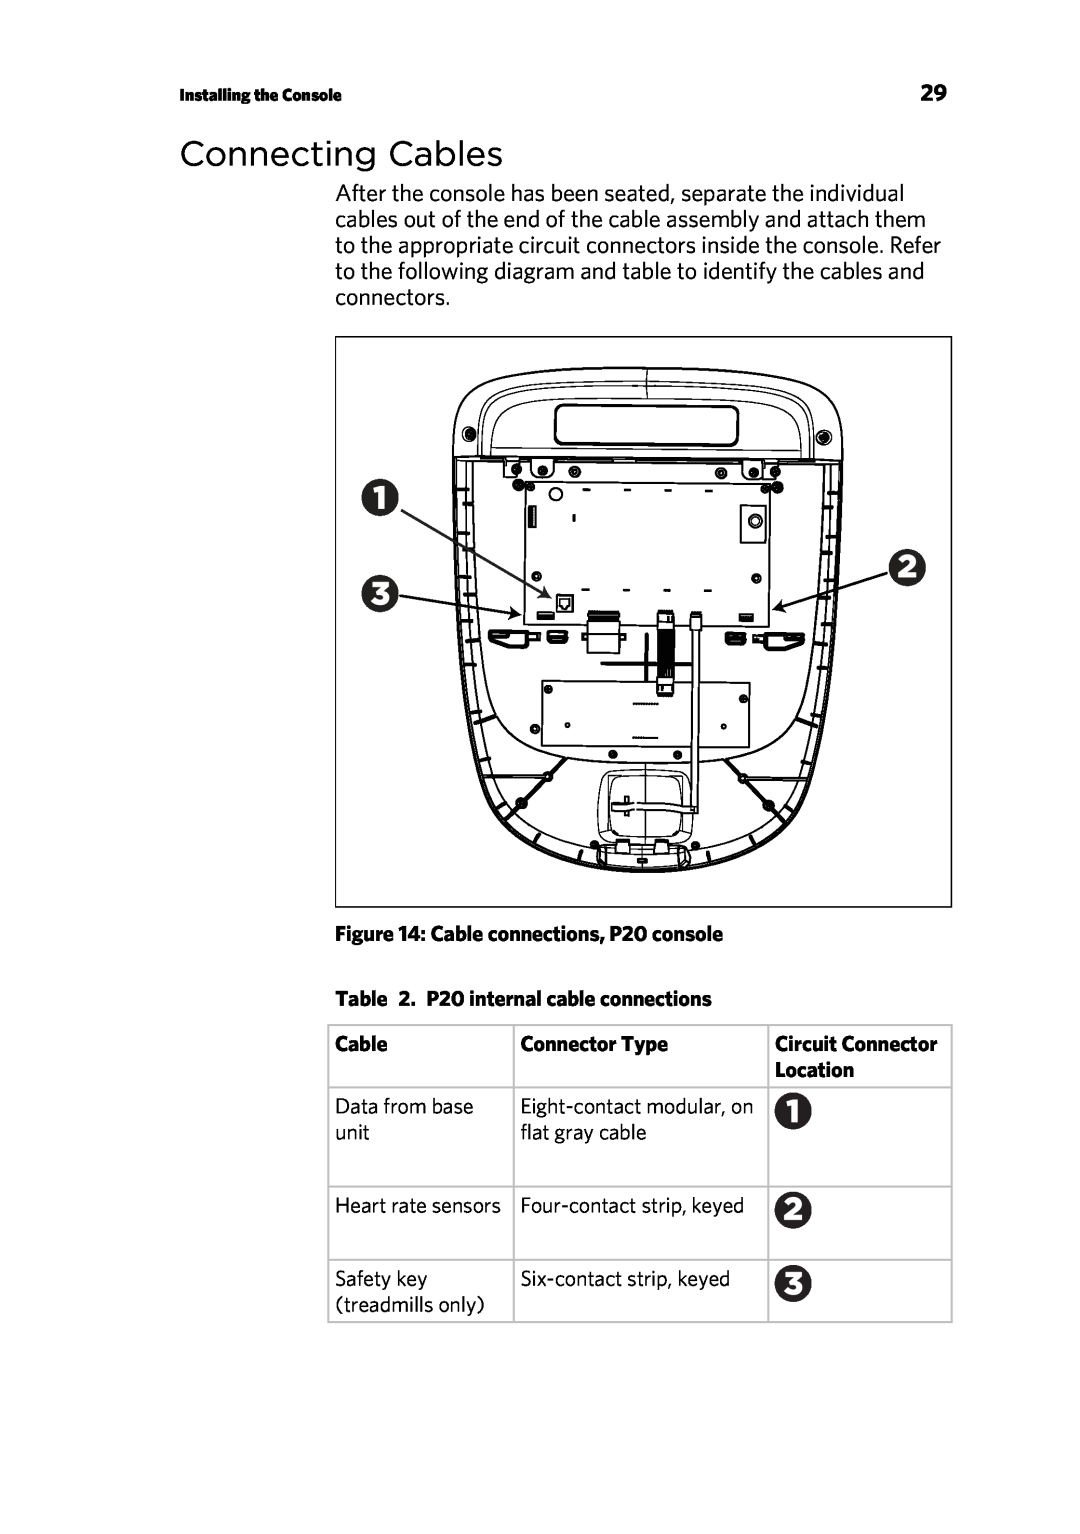 Precor 300753-201 manual Connecting Cables, Cable connections, P20 console, P20 internal cable connections, Connector Type 